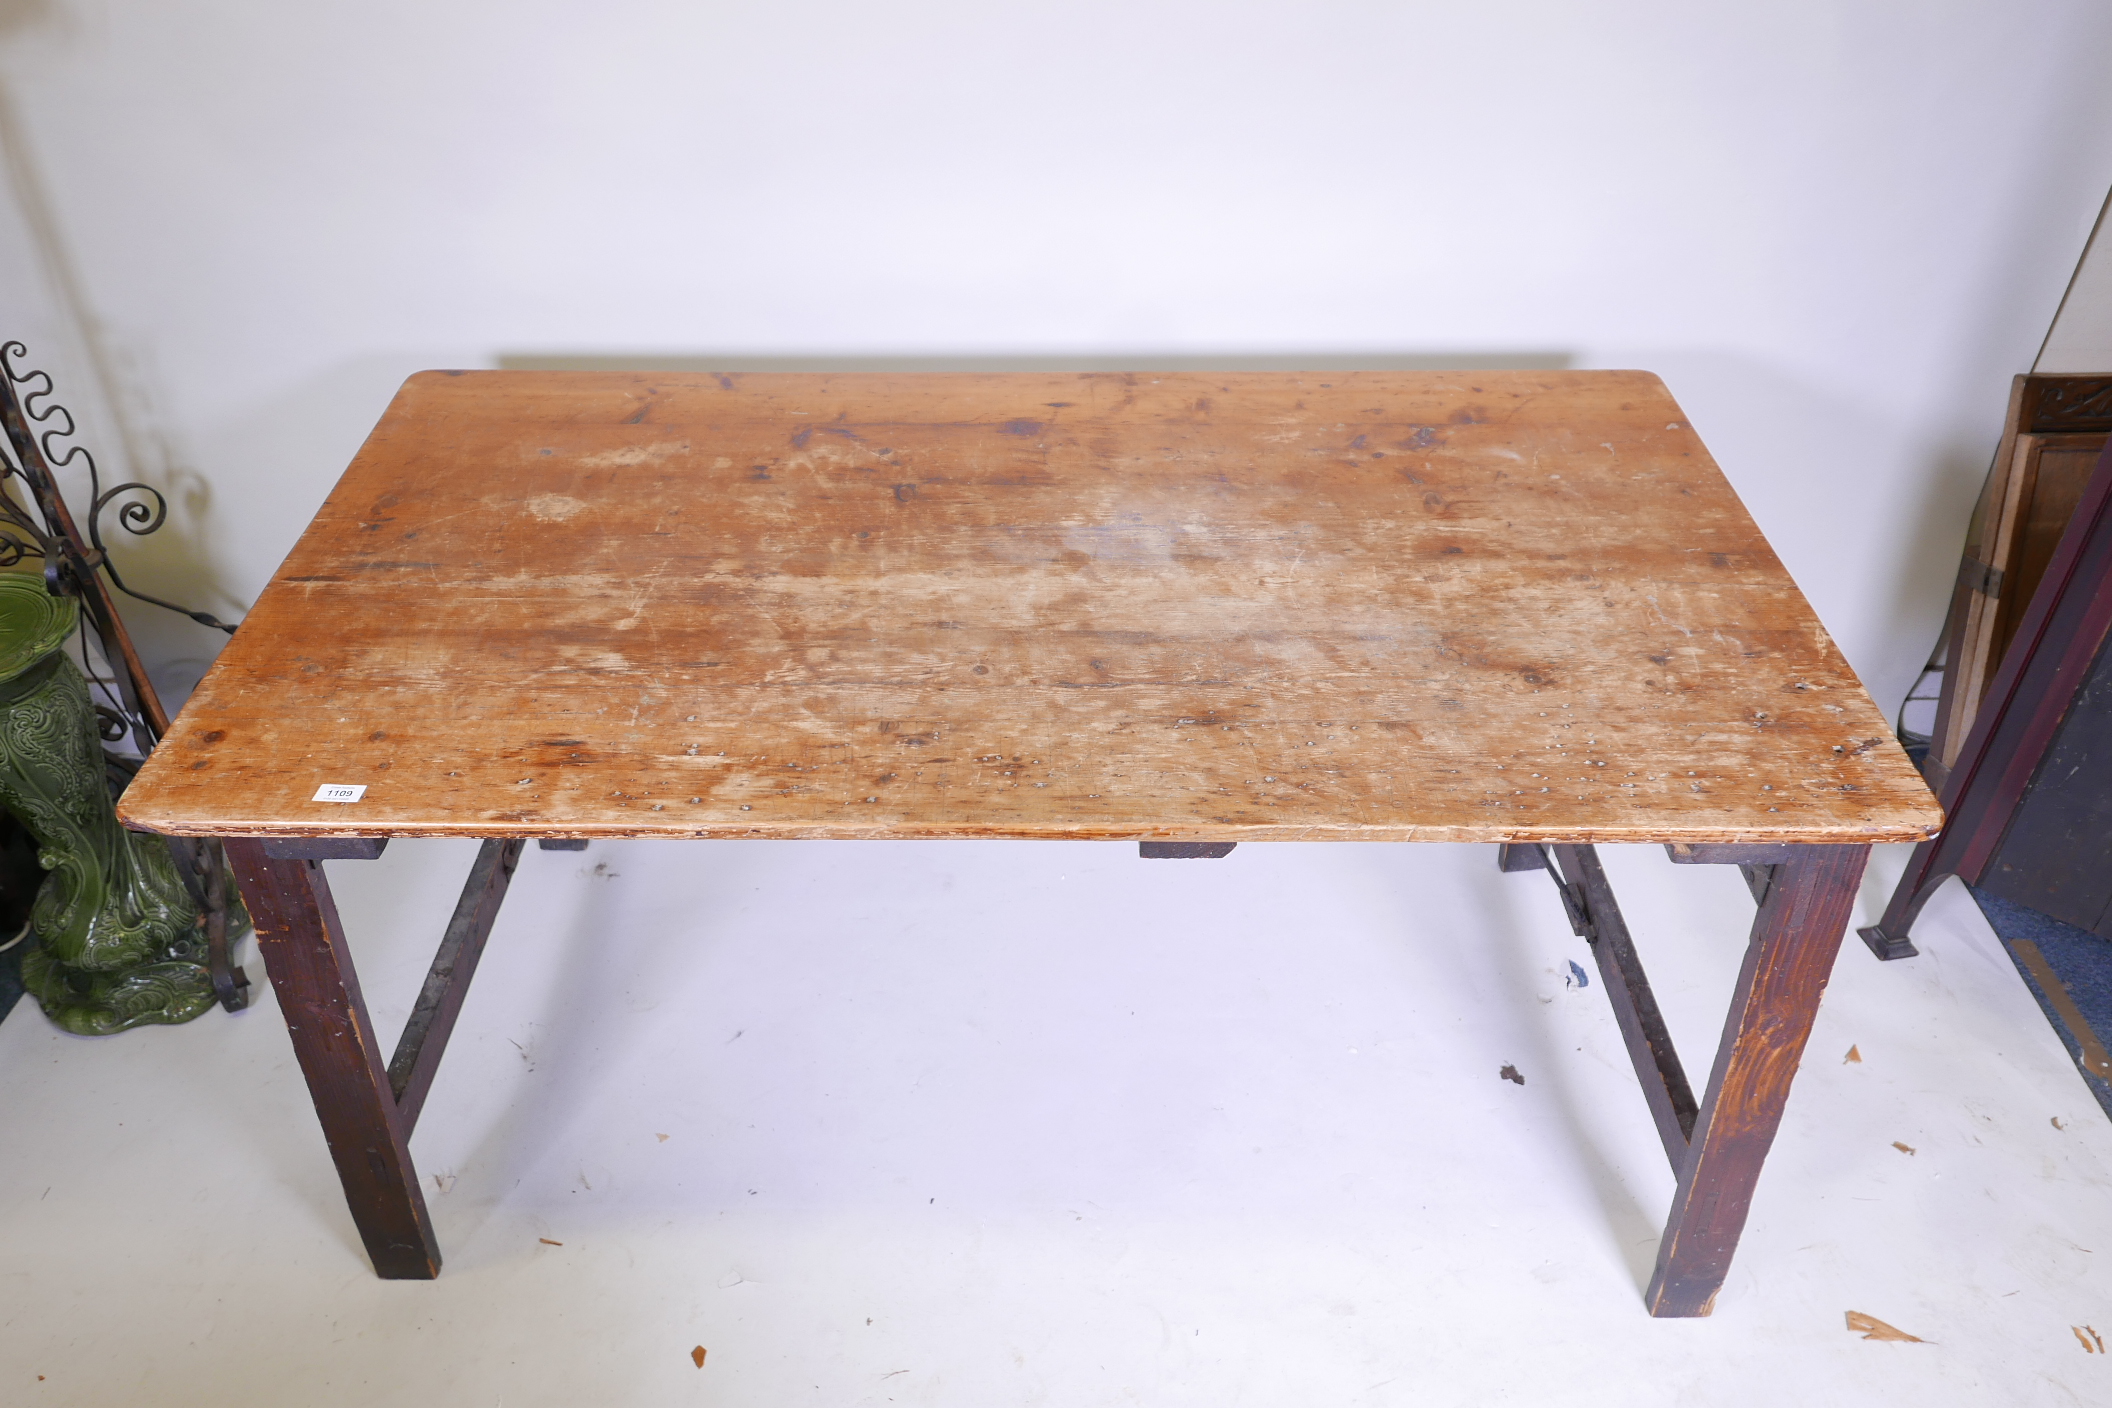 An antique pine trestle table with plank top, 60" x 32" x 30" - Image 2 of 2